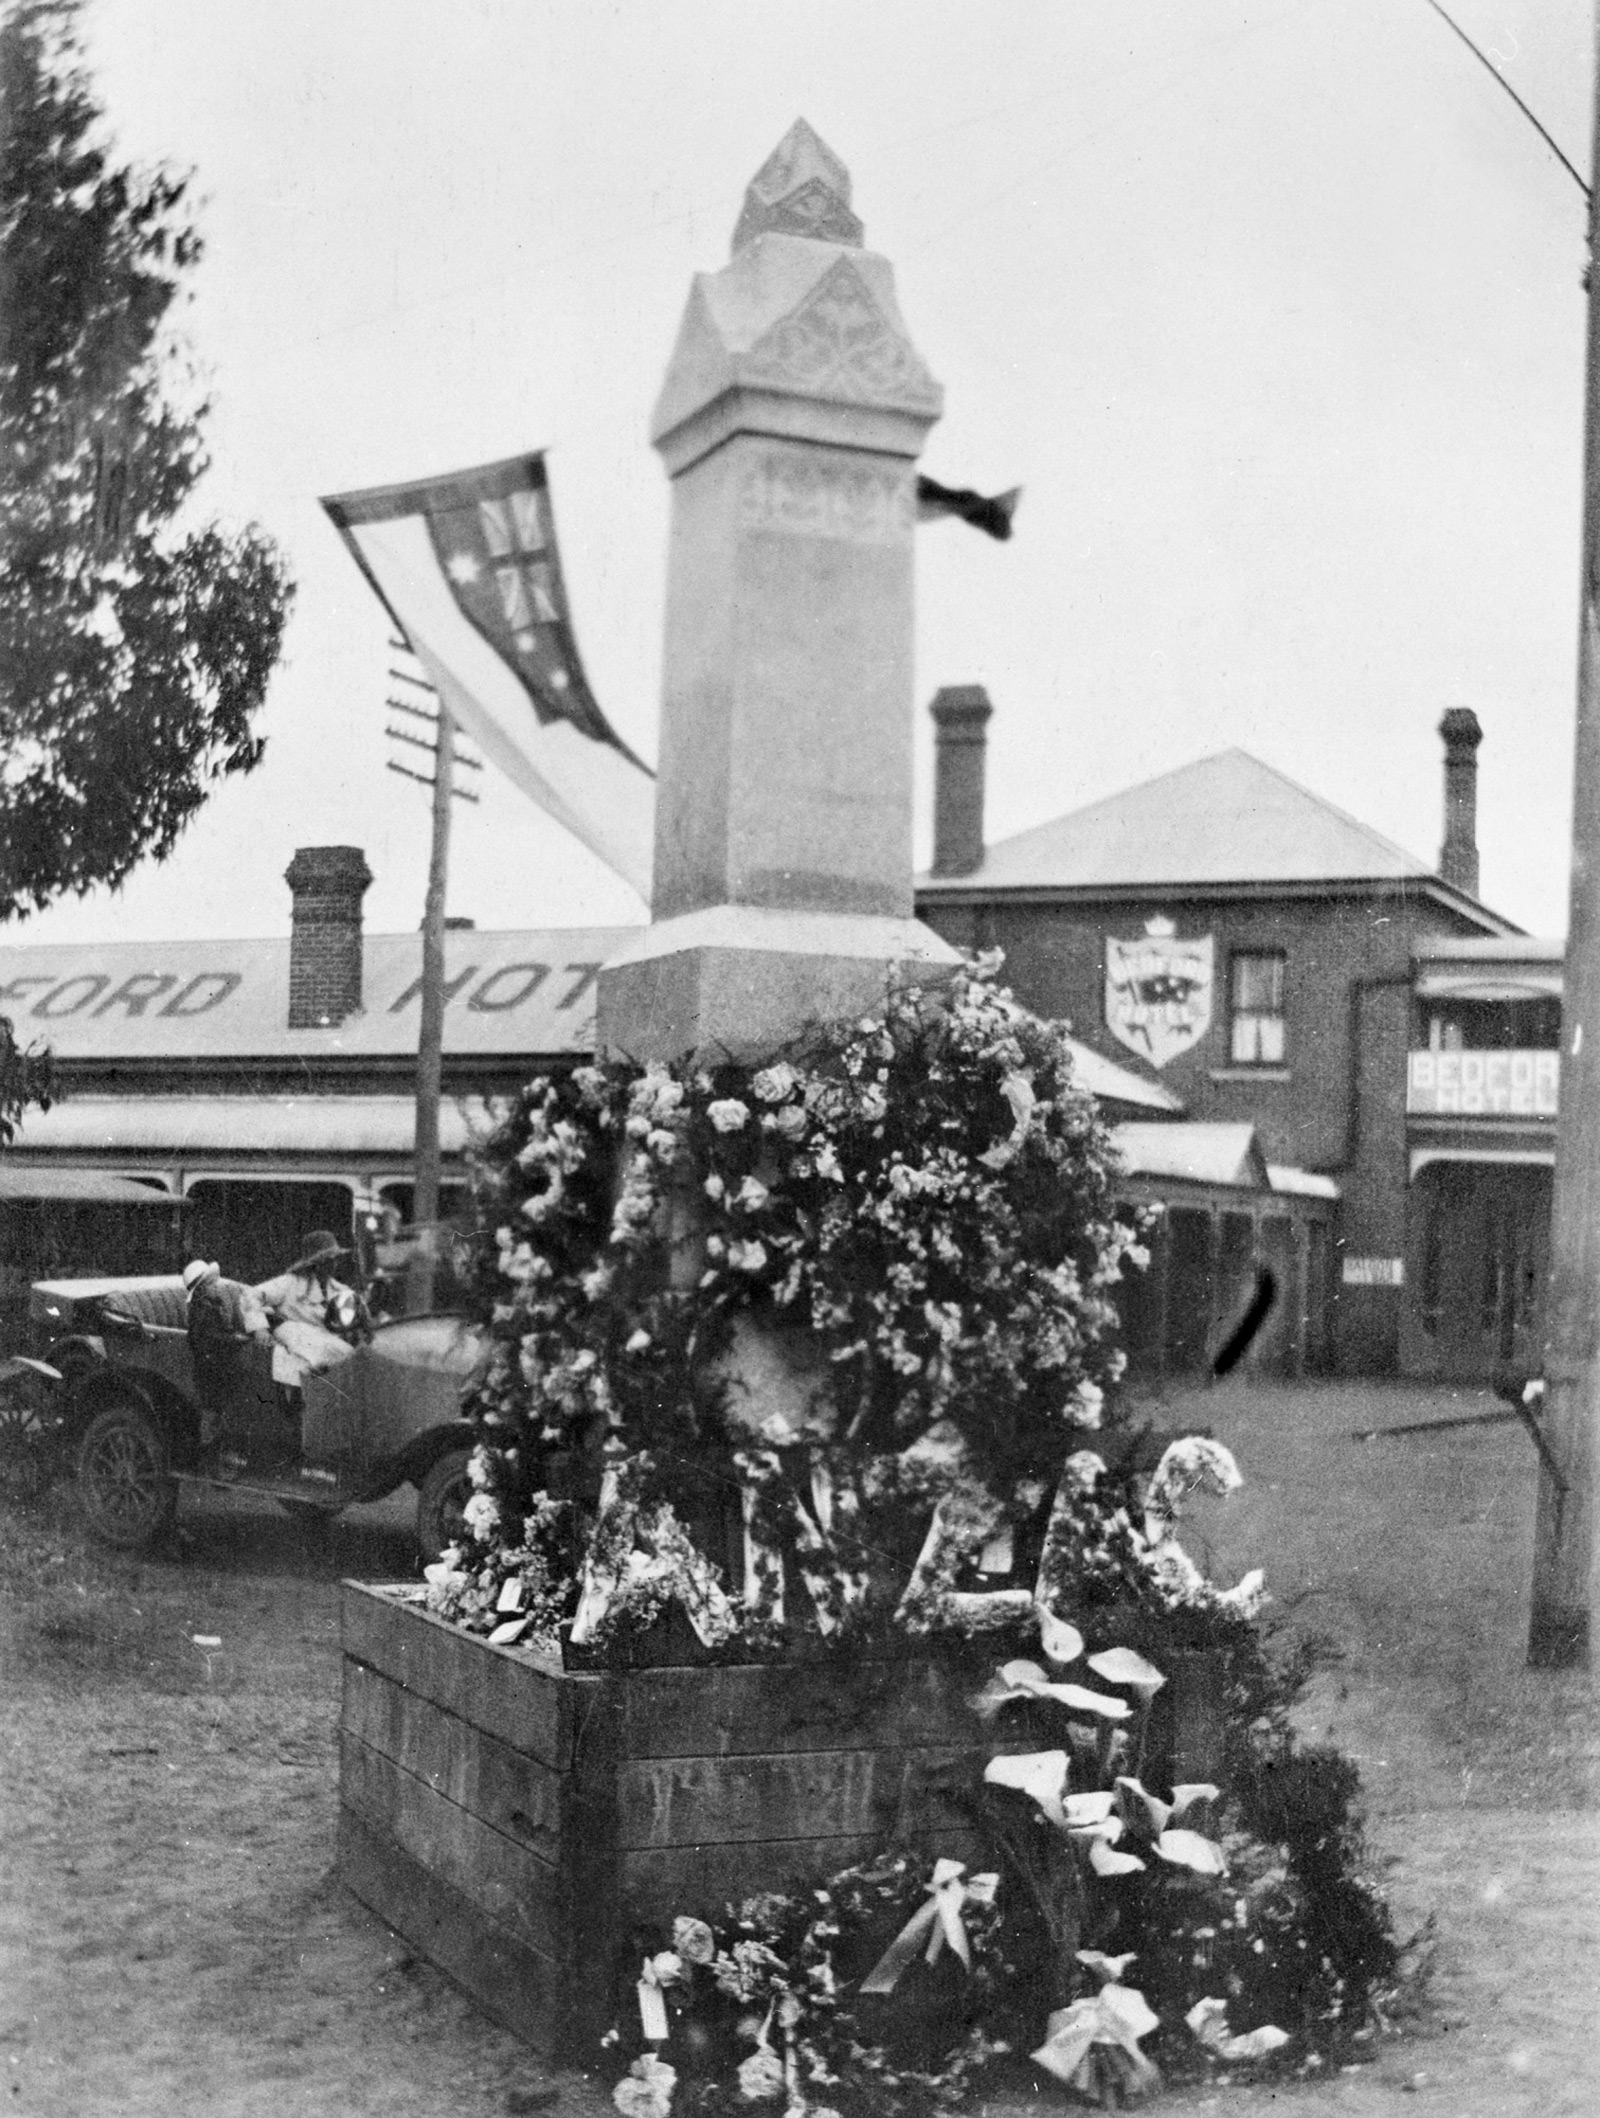 <p>First World War memorial after a ceremony, Bookton, Western Australia, 1921</p>
